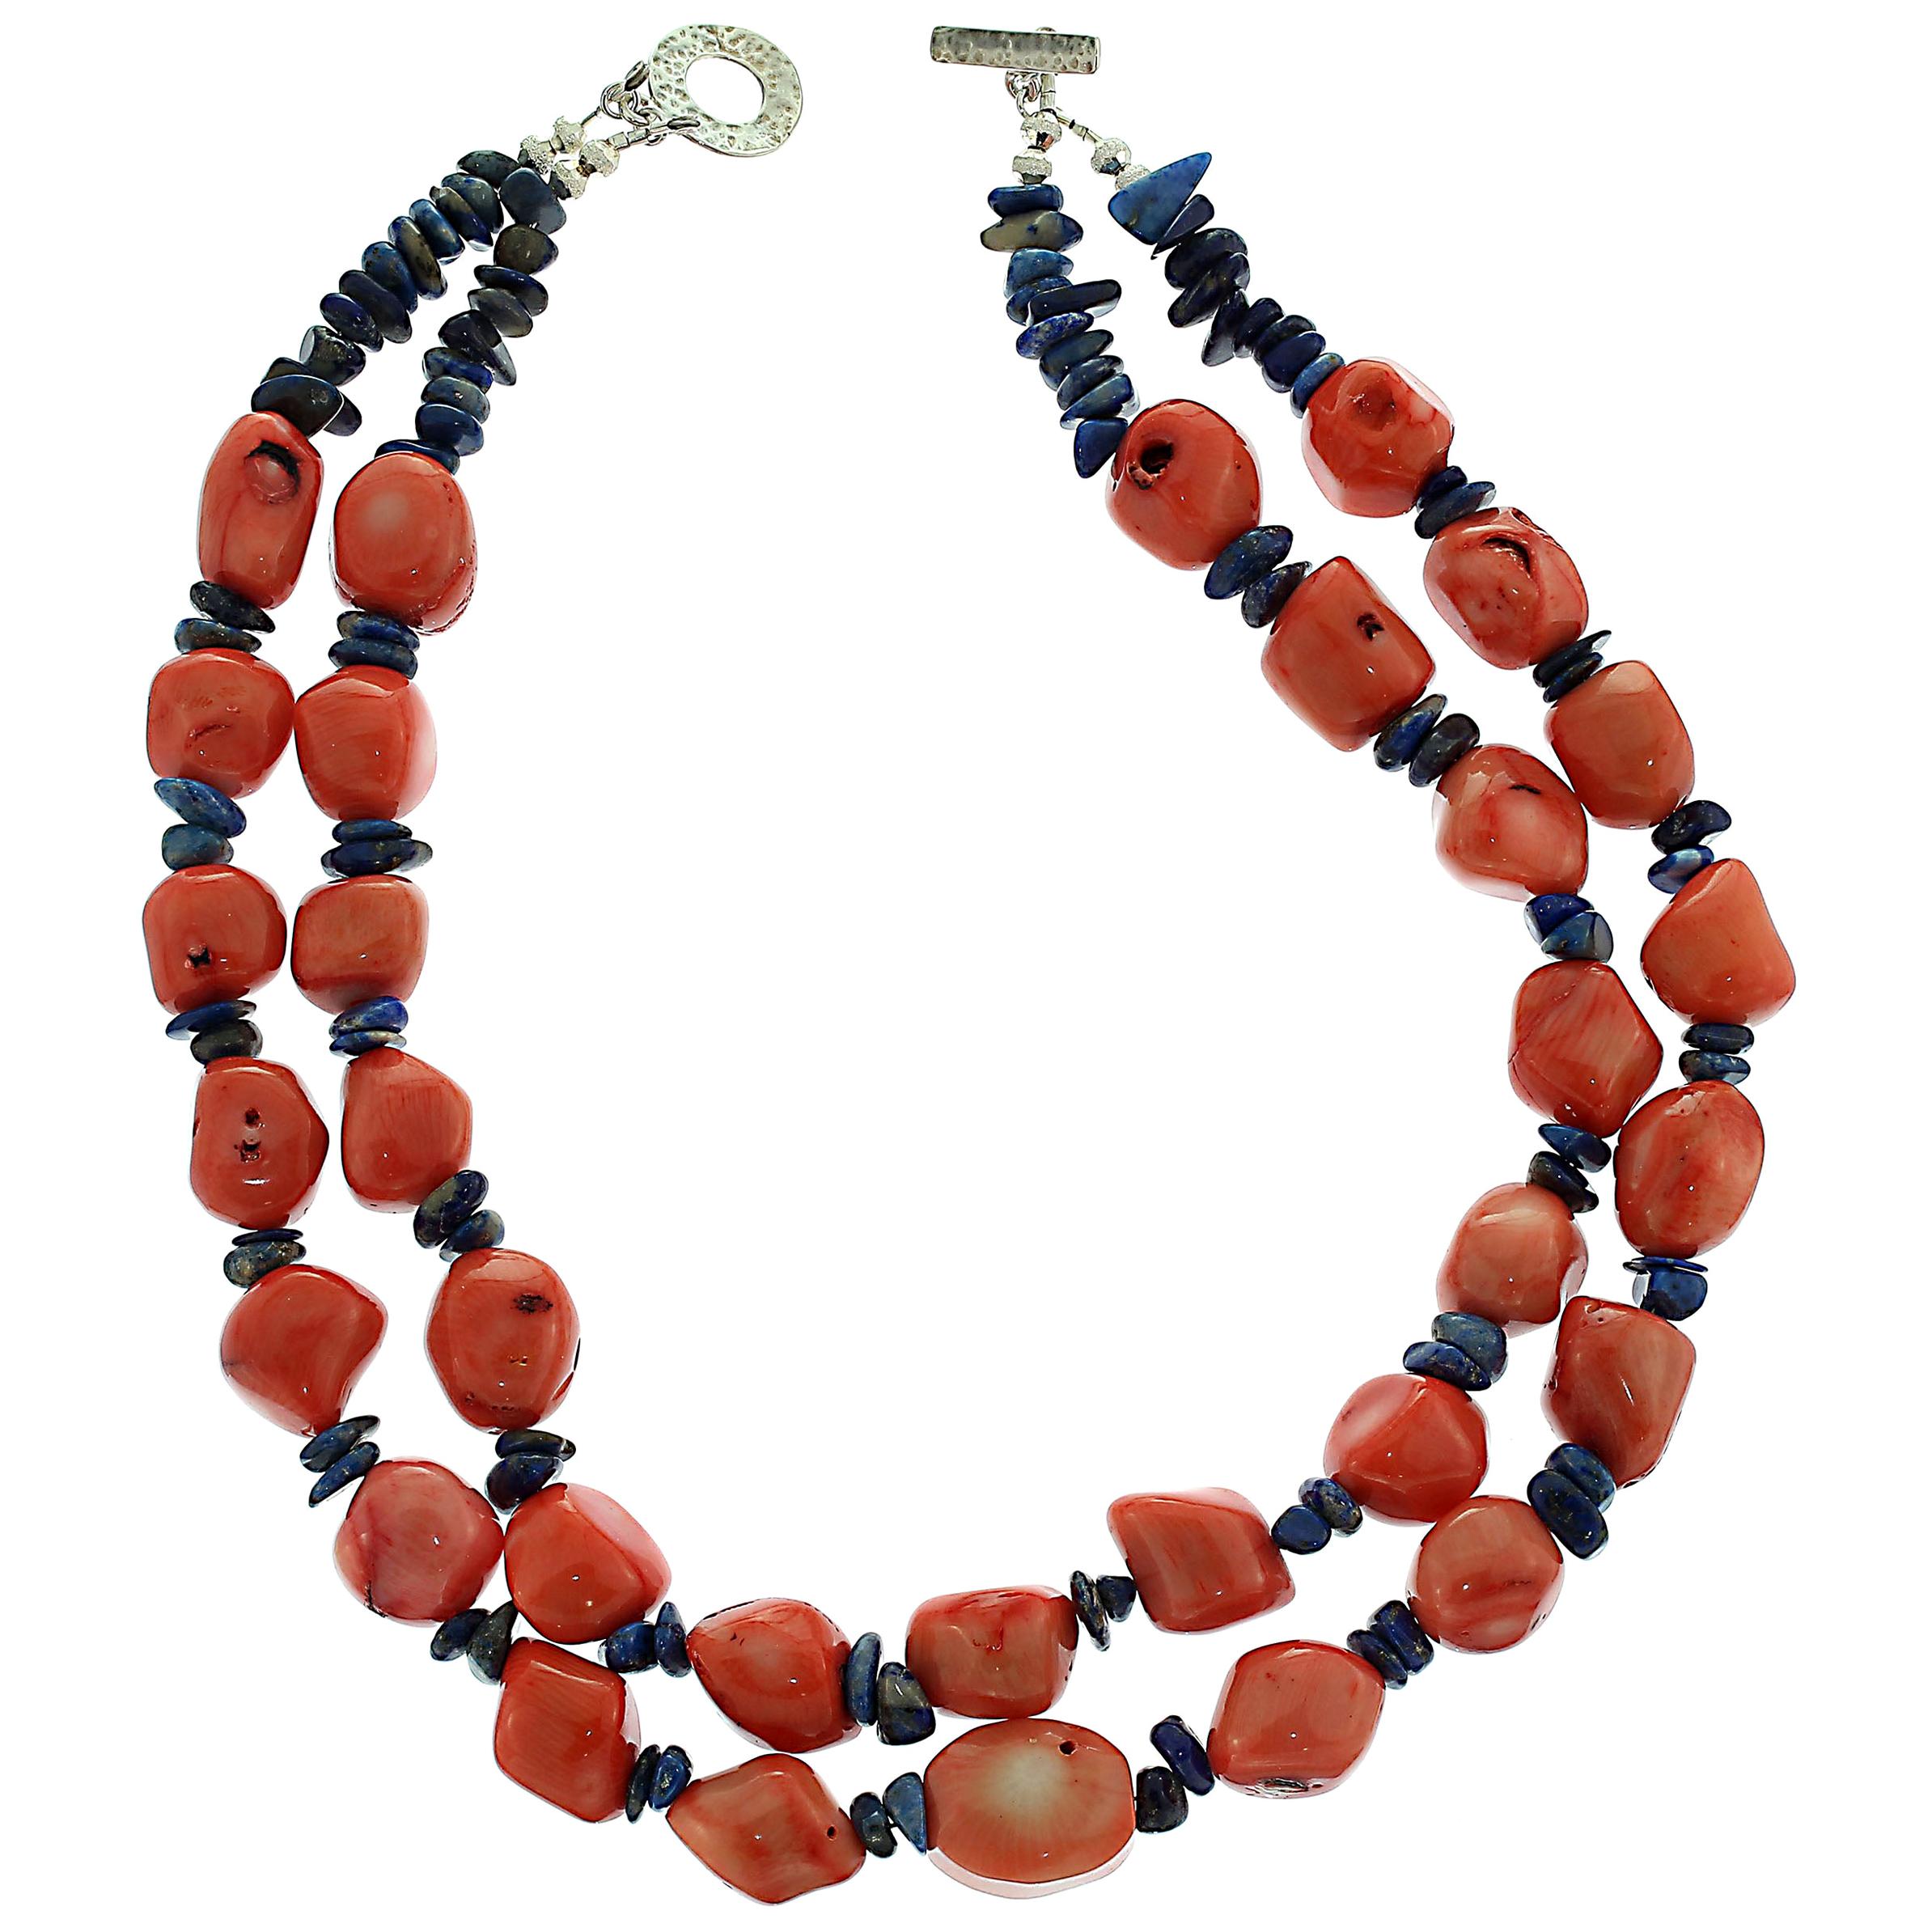 Artisan AJD Double Strand Necklace of Peach Coral and Lapis Lazuli